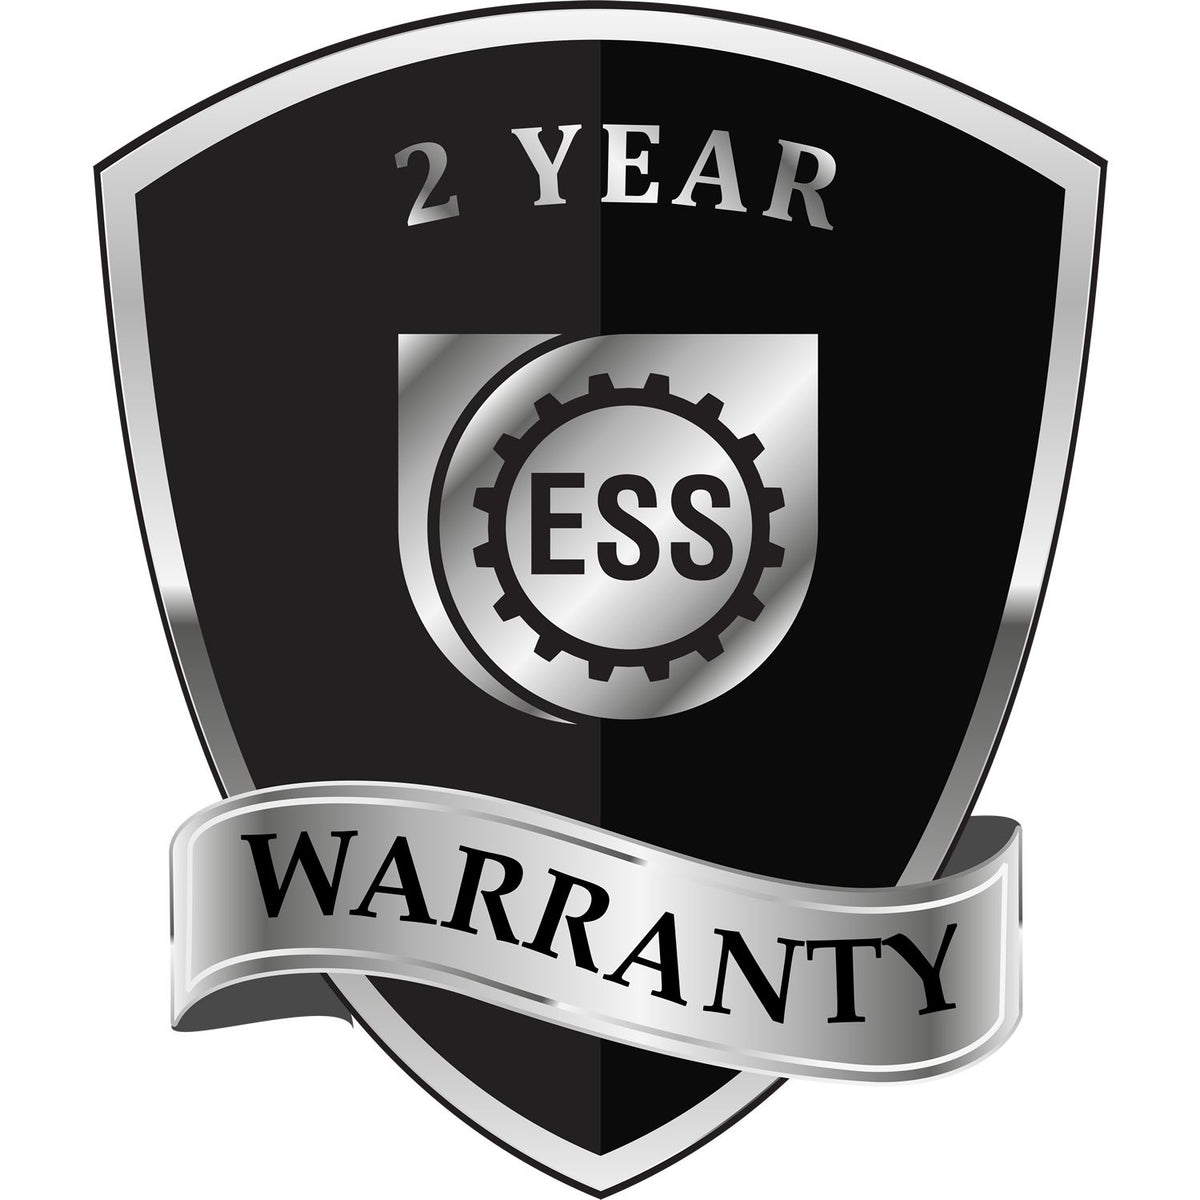 A black and silver badge or emblem showing warranty information for the Gift Pennsylvania Landscape Architect Seal